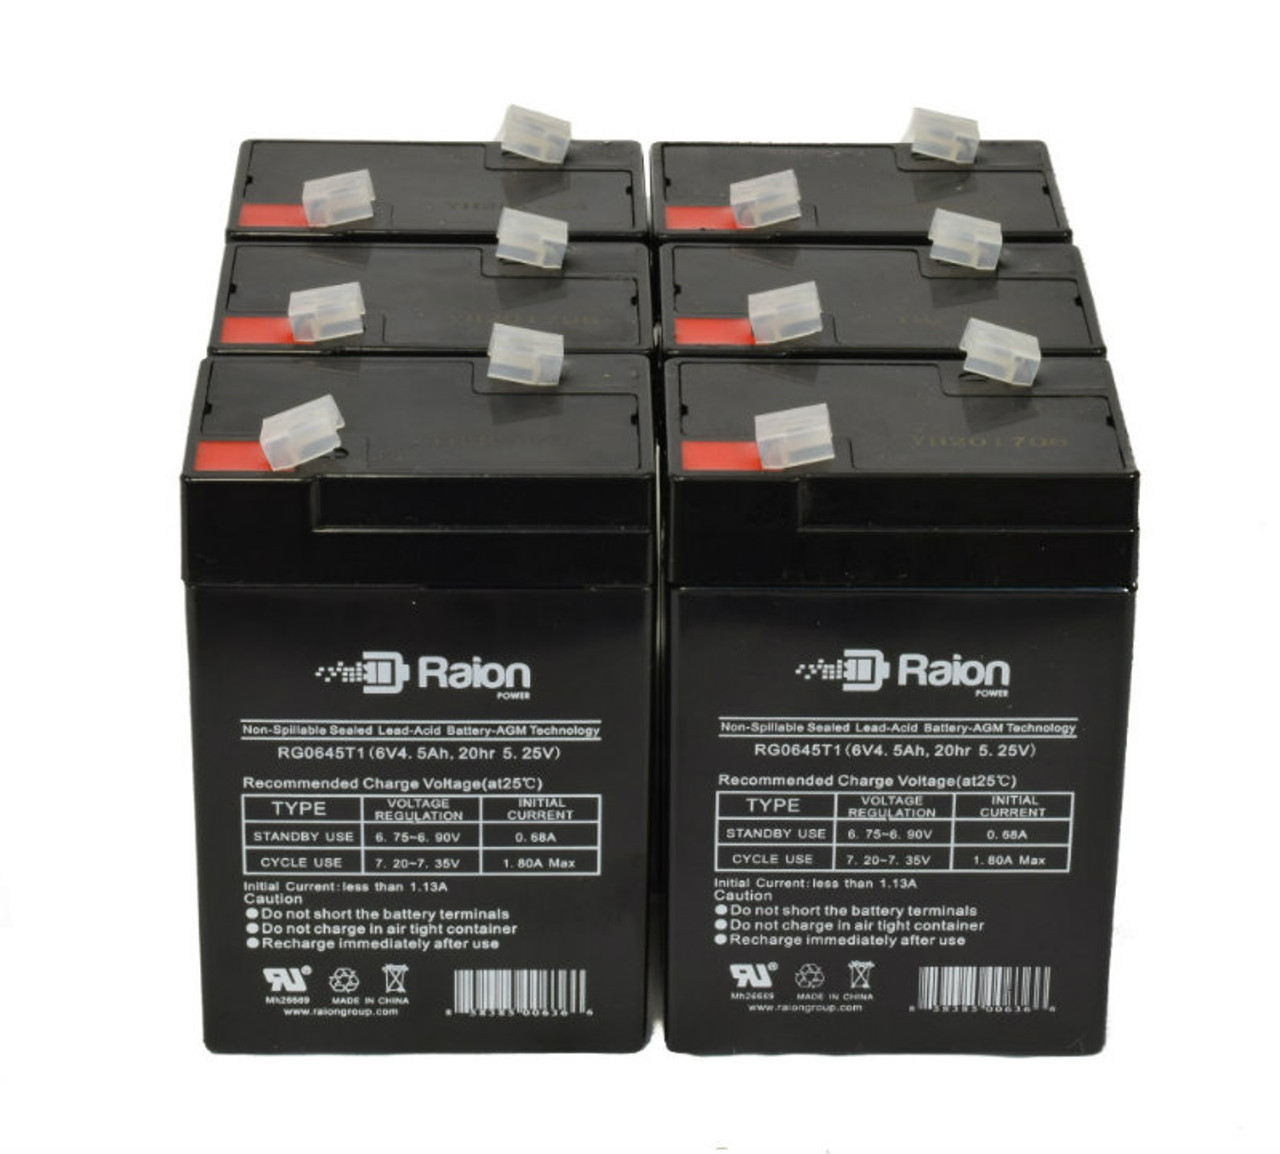 Raion Power 6 Volt 4.5Ah RG0645T1 Replacement Battery for Leadhoo NP4.5-6 - 6 Pack